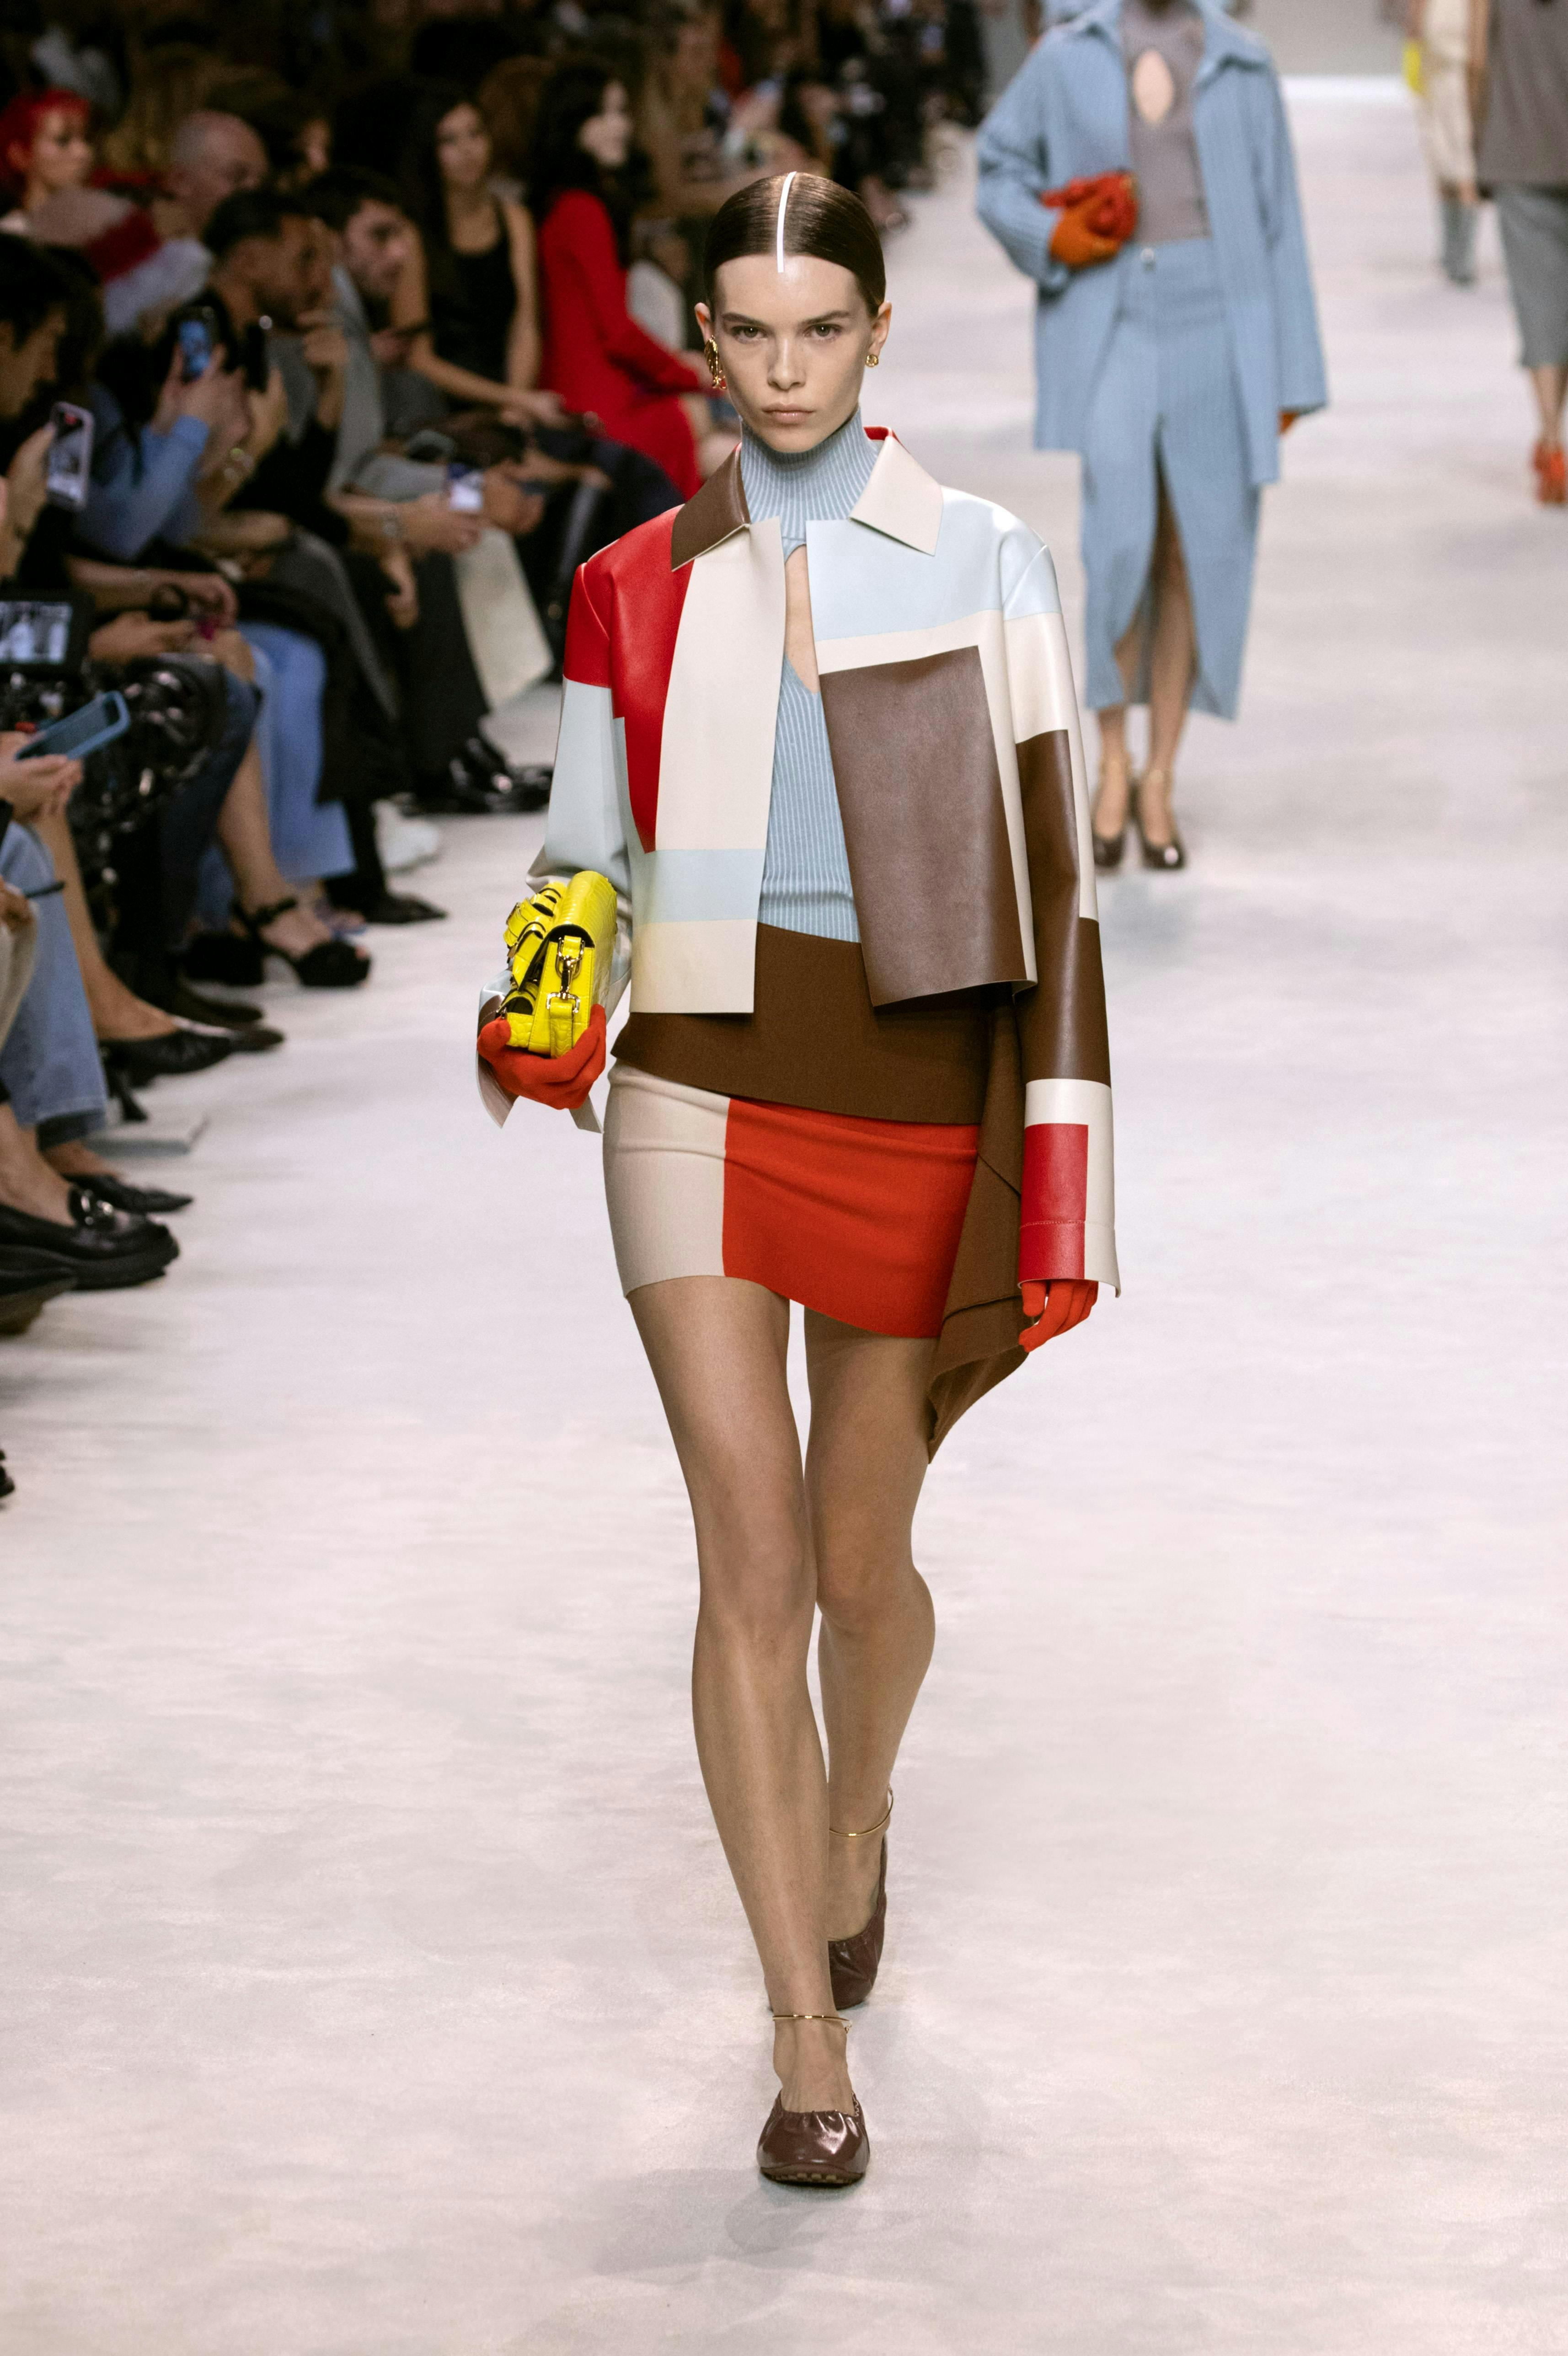 model in colorblocked jacket, blue top, and mini skirt